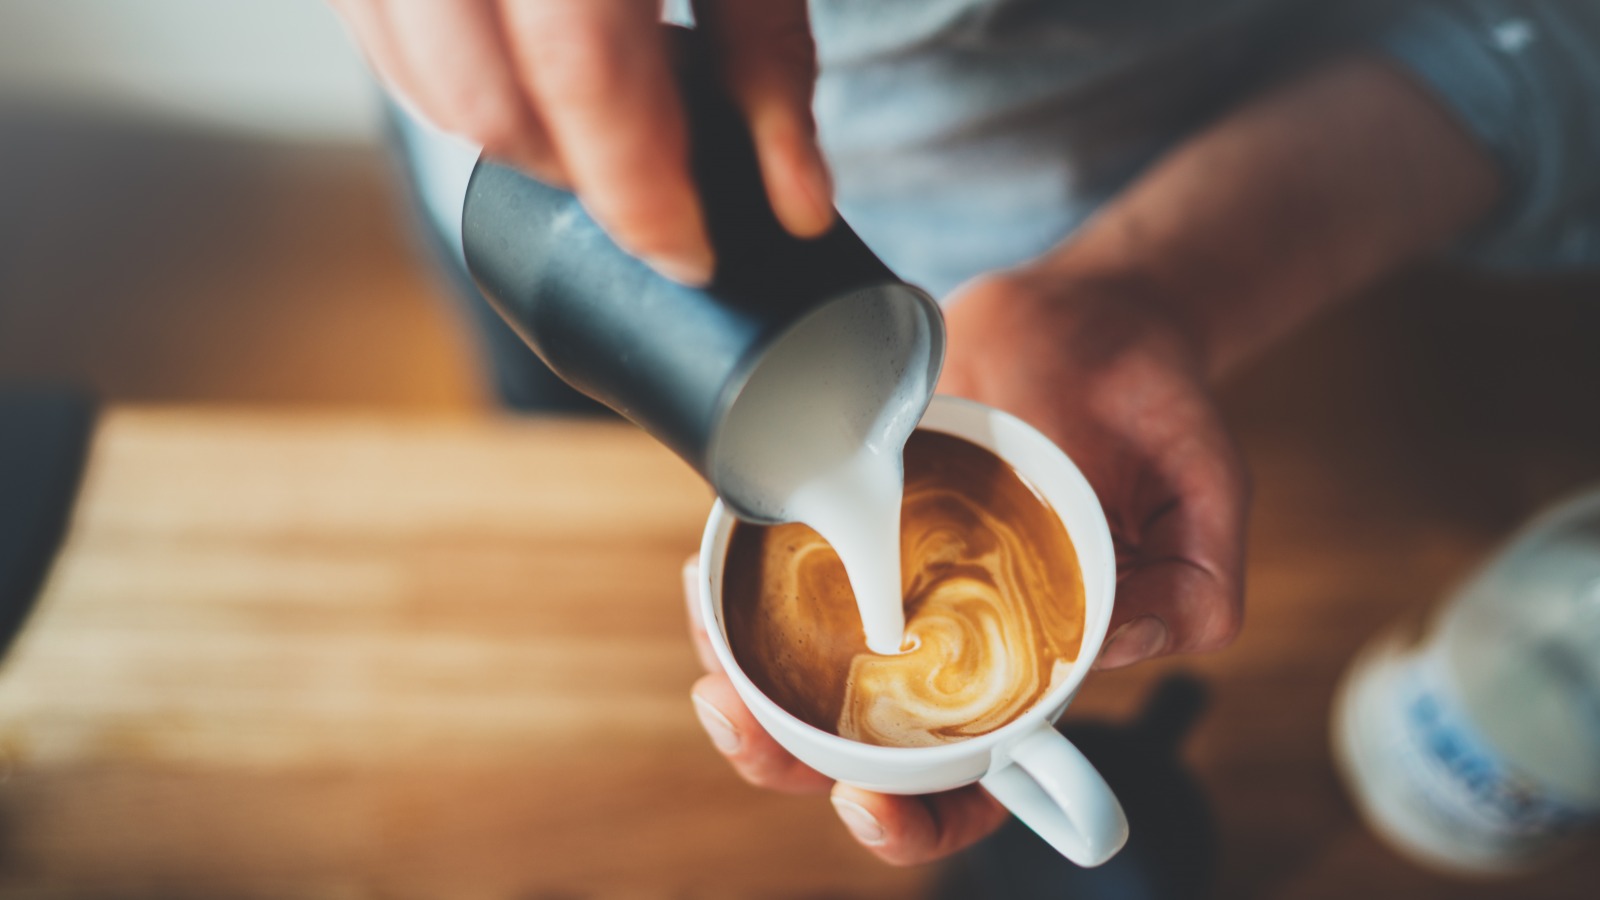 What You Should Know Before Adding Milk To Your Coffee